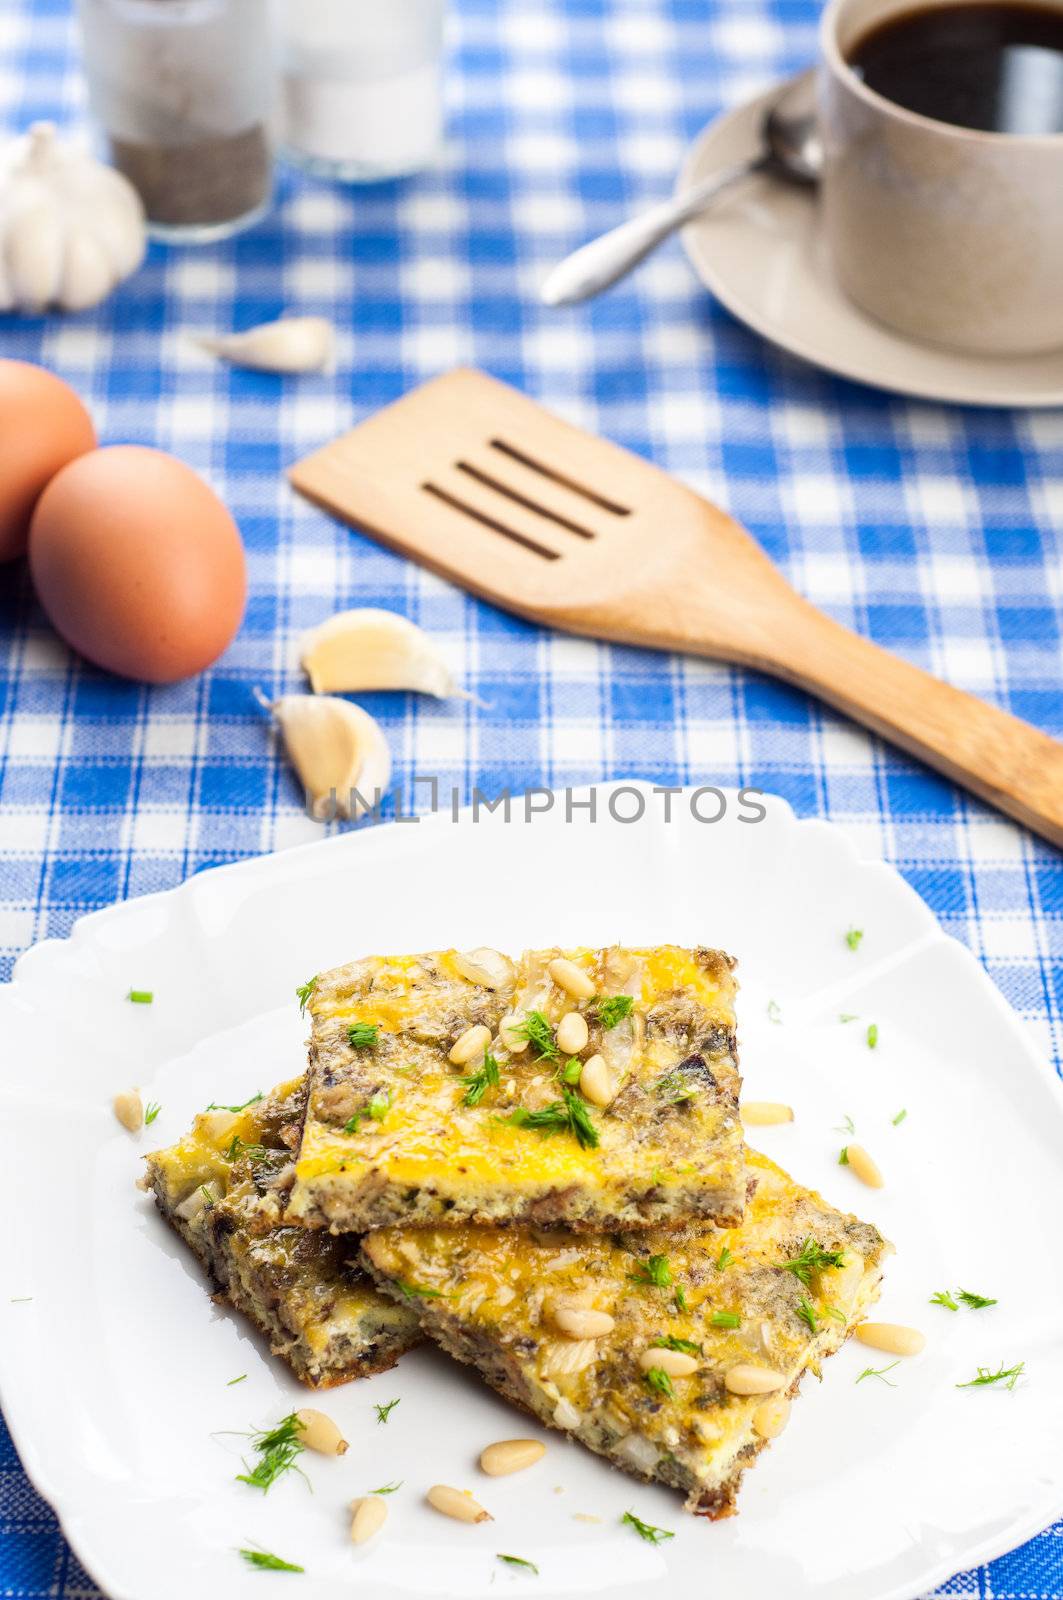 Delicious omlette with sardines and pine seeds